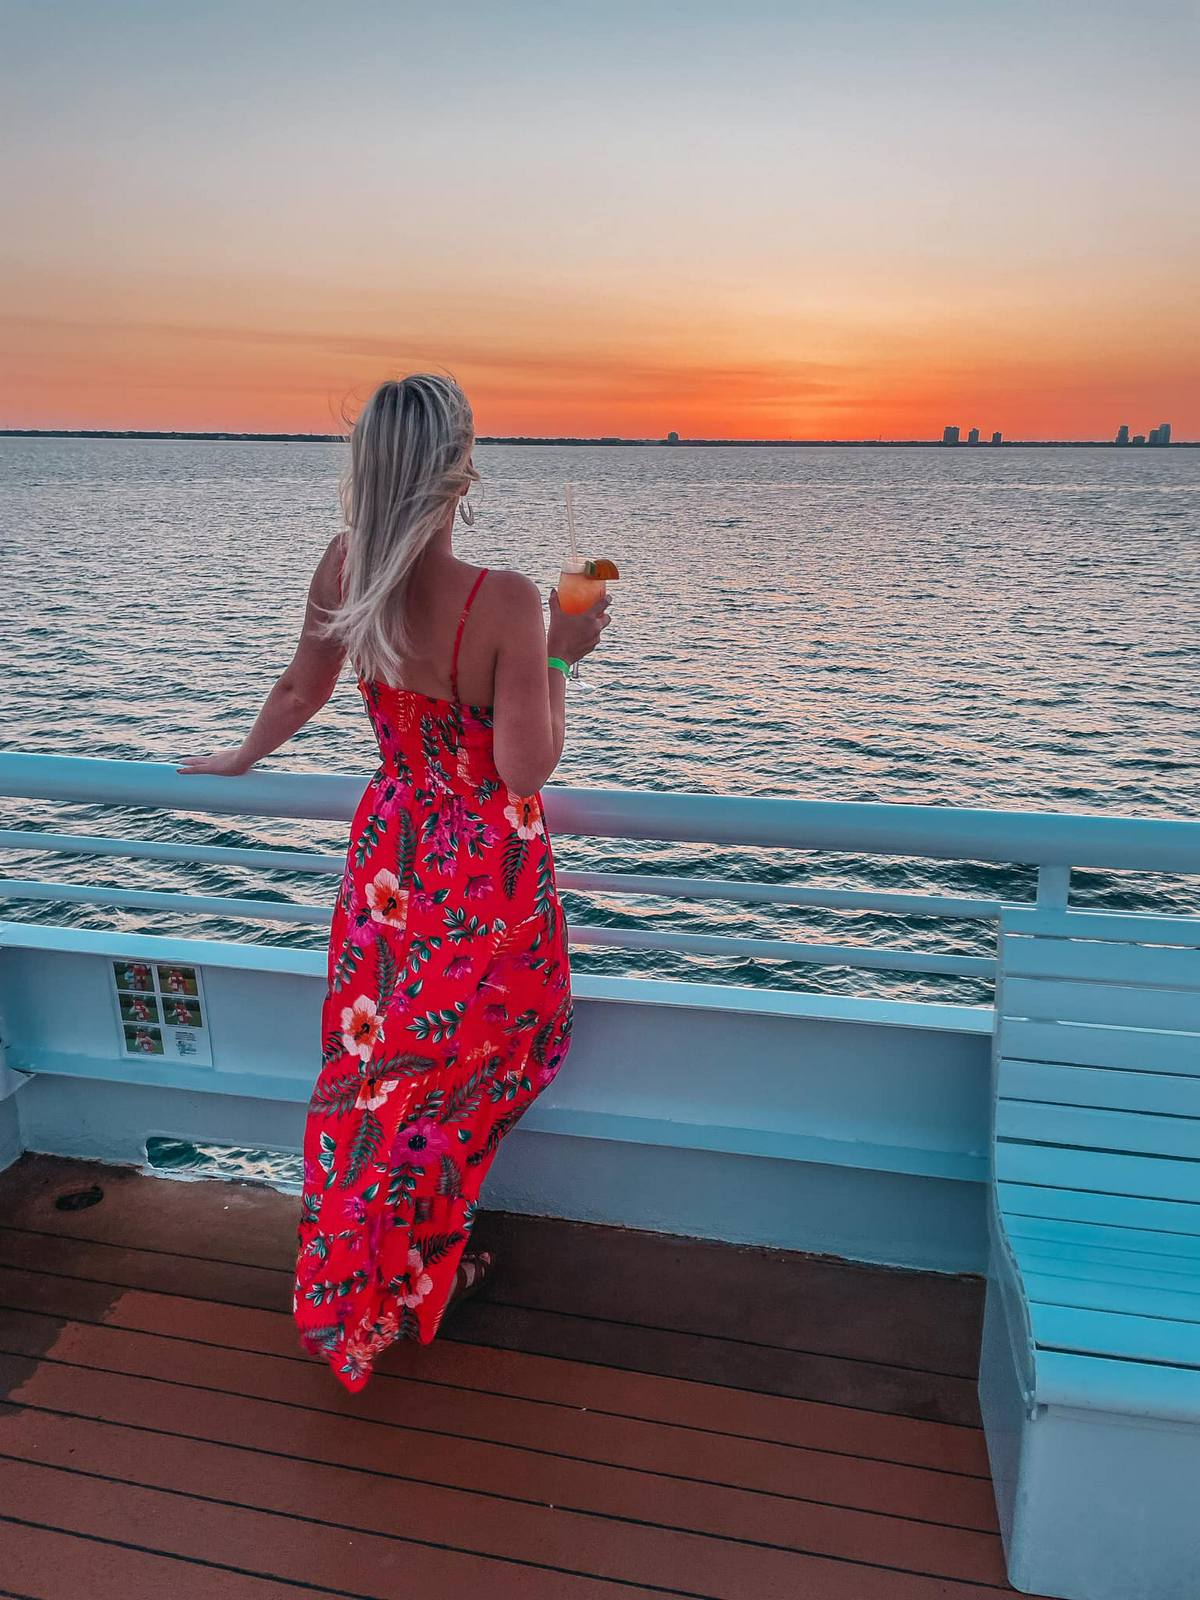 Sunset views from Yacht Starship in Tampa